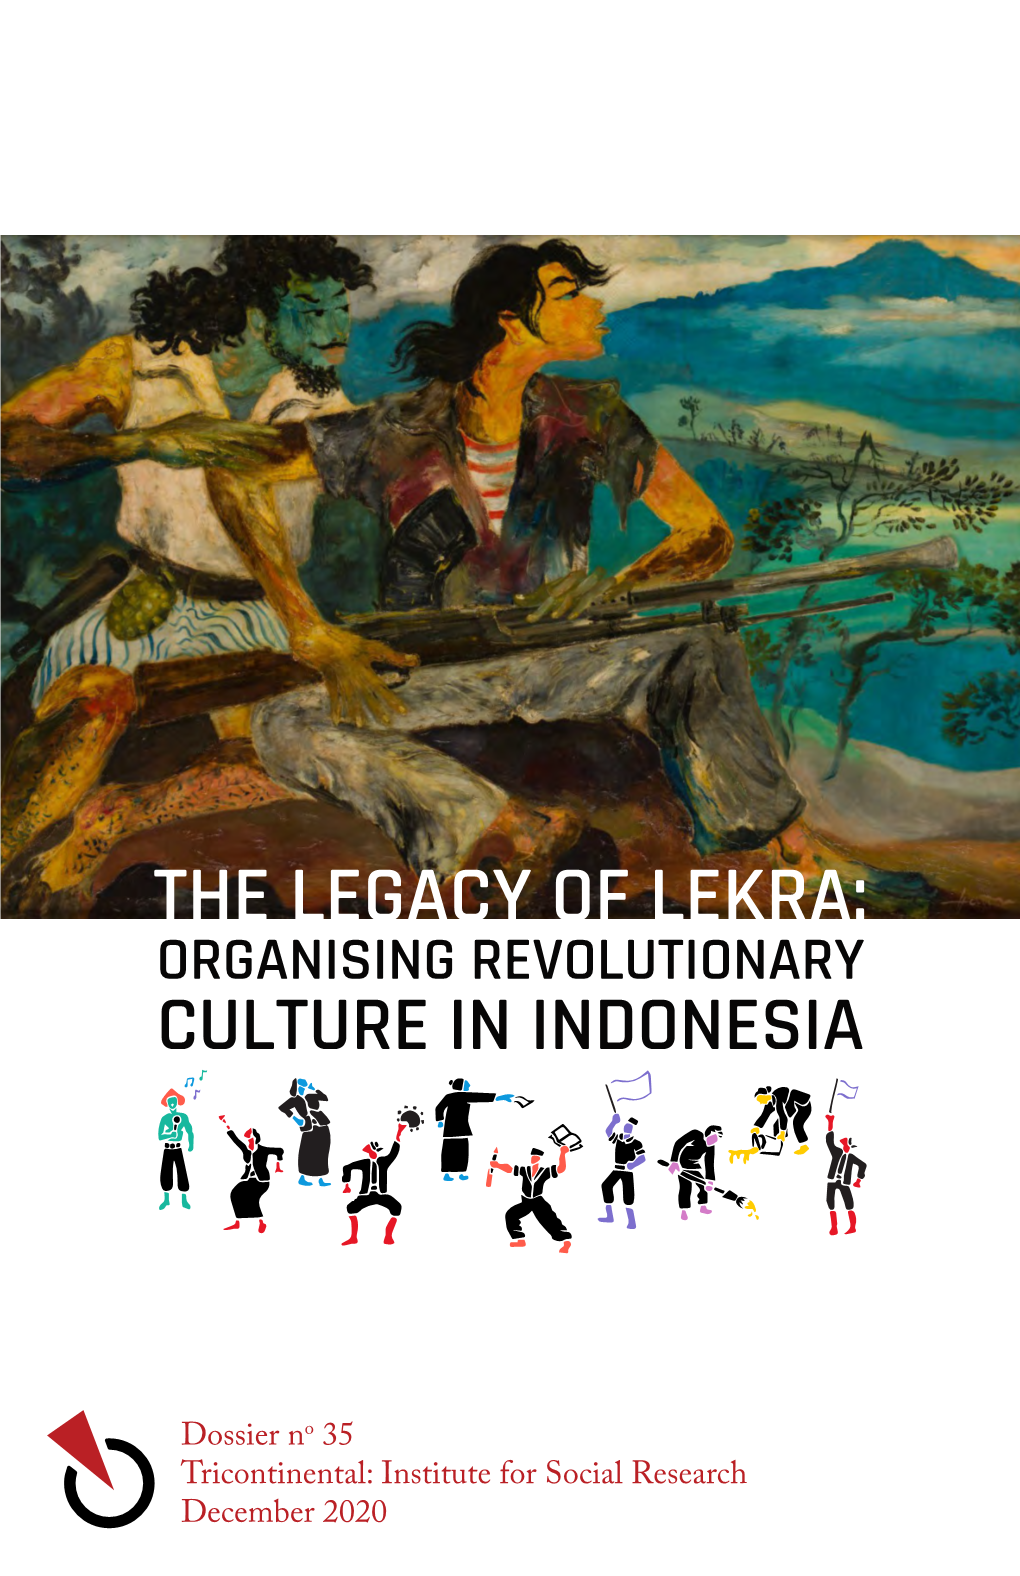 The Legacy of Lekra: Organising Revolutionary Culture in Indonesia